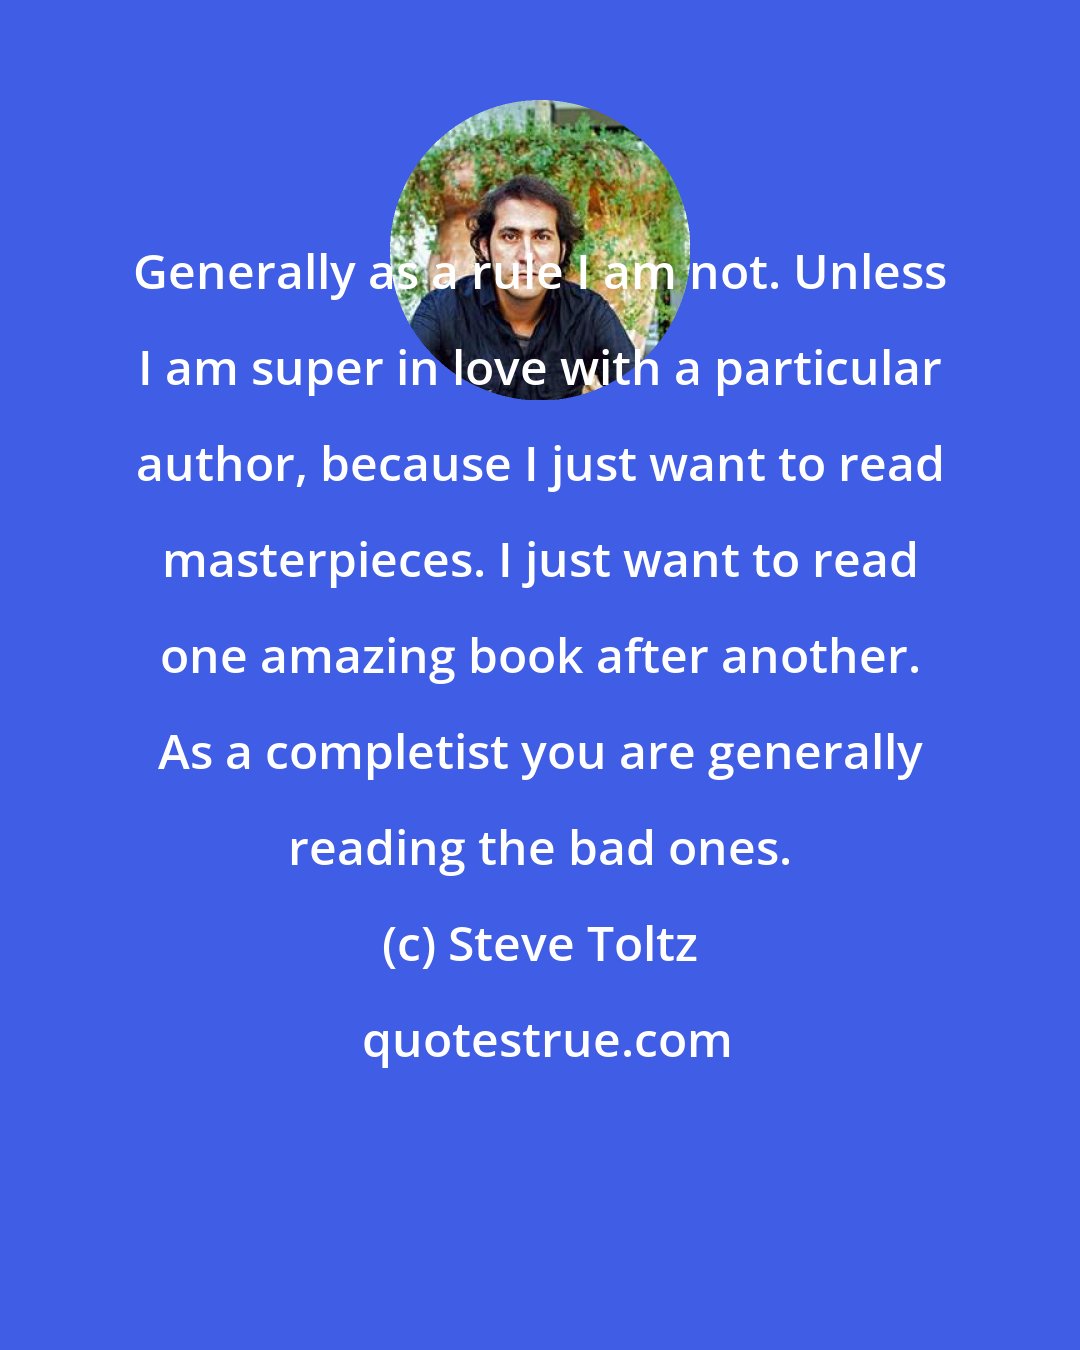 Steve Toltz: Generally as a rule I am not. Unless I am super in love with a particular author, because I just want to read masterpieces. I just want to read one amazing book after another. As a completist you are generally reading the bad ones.